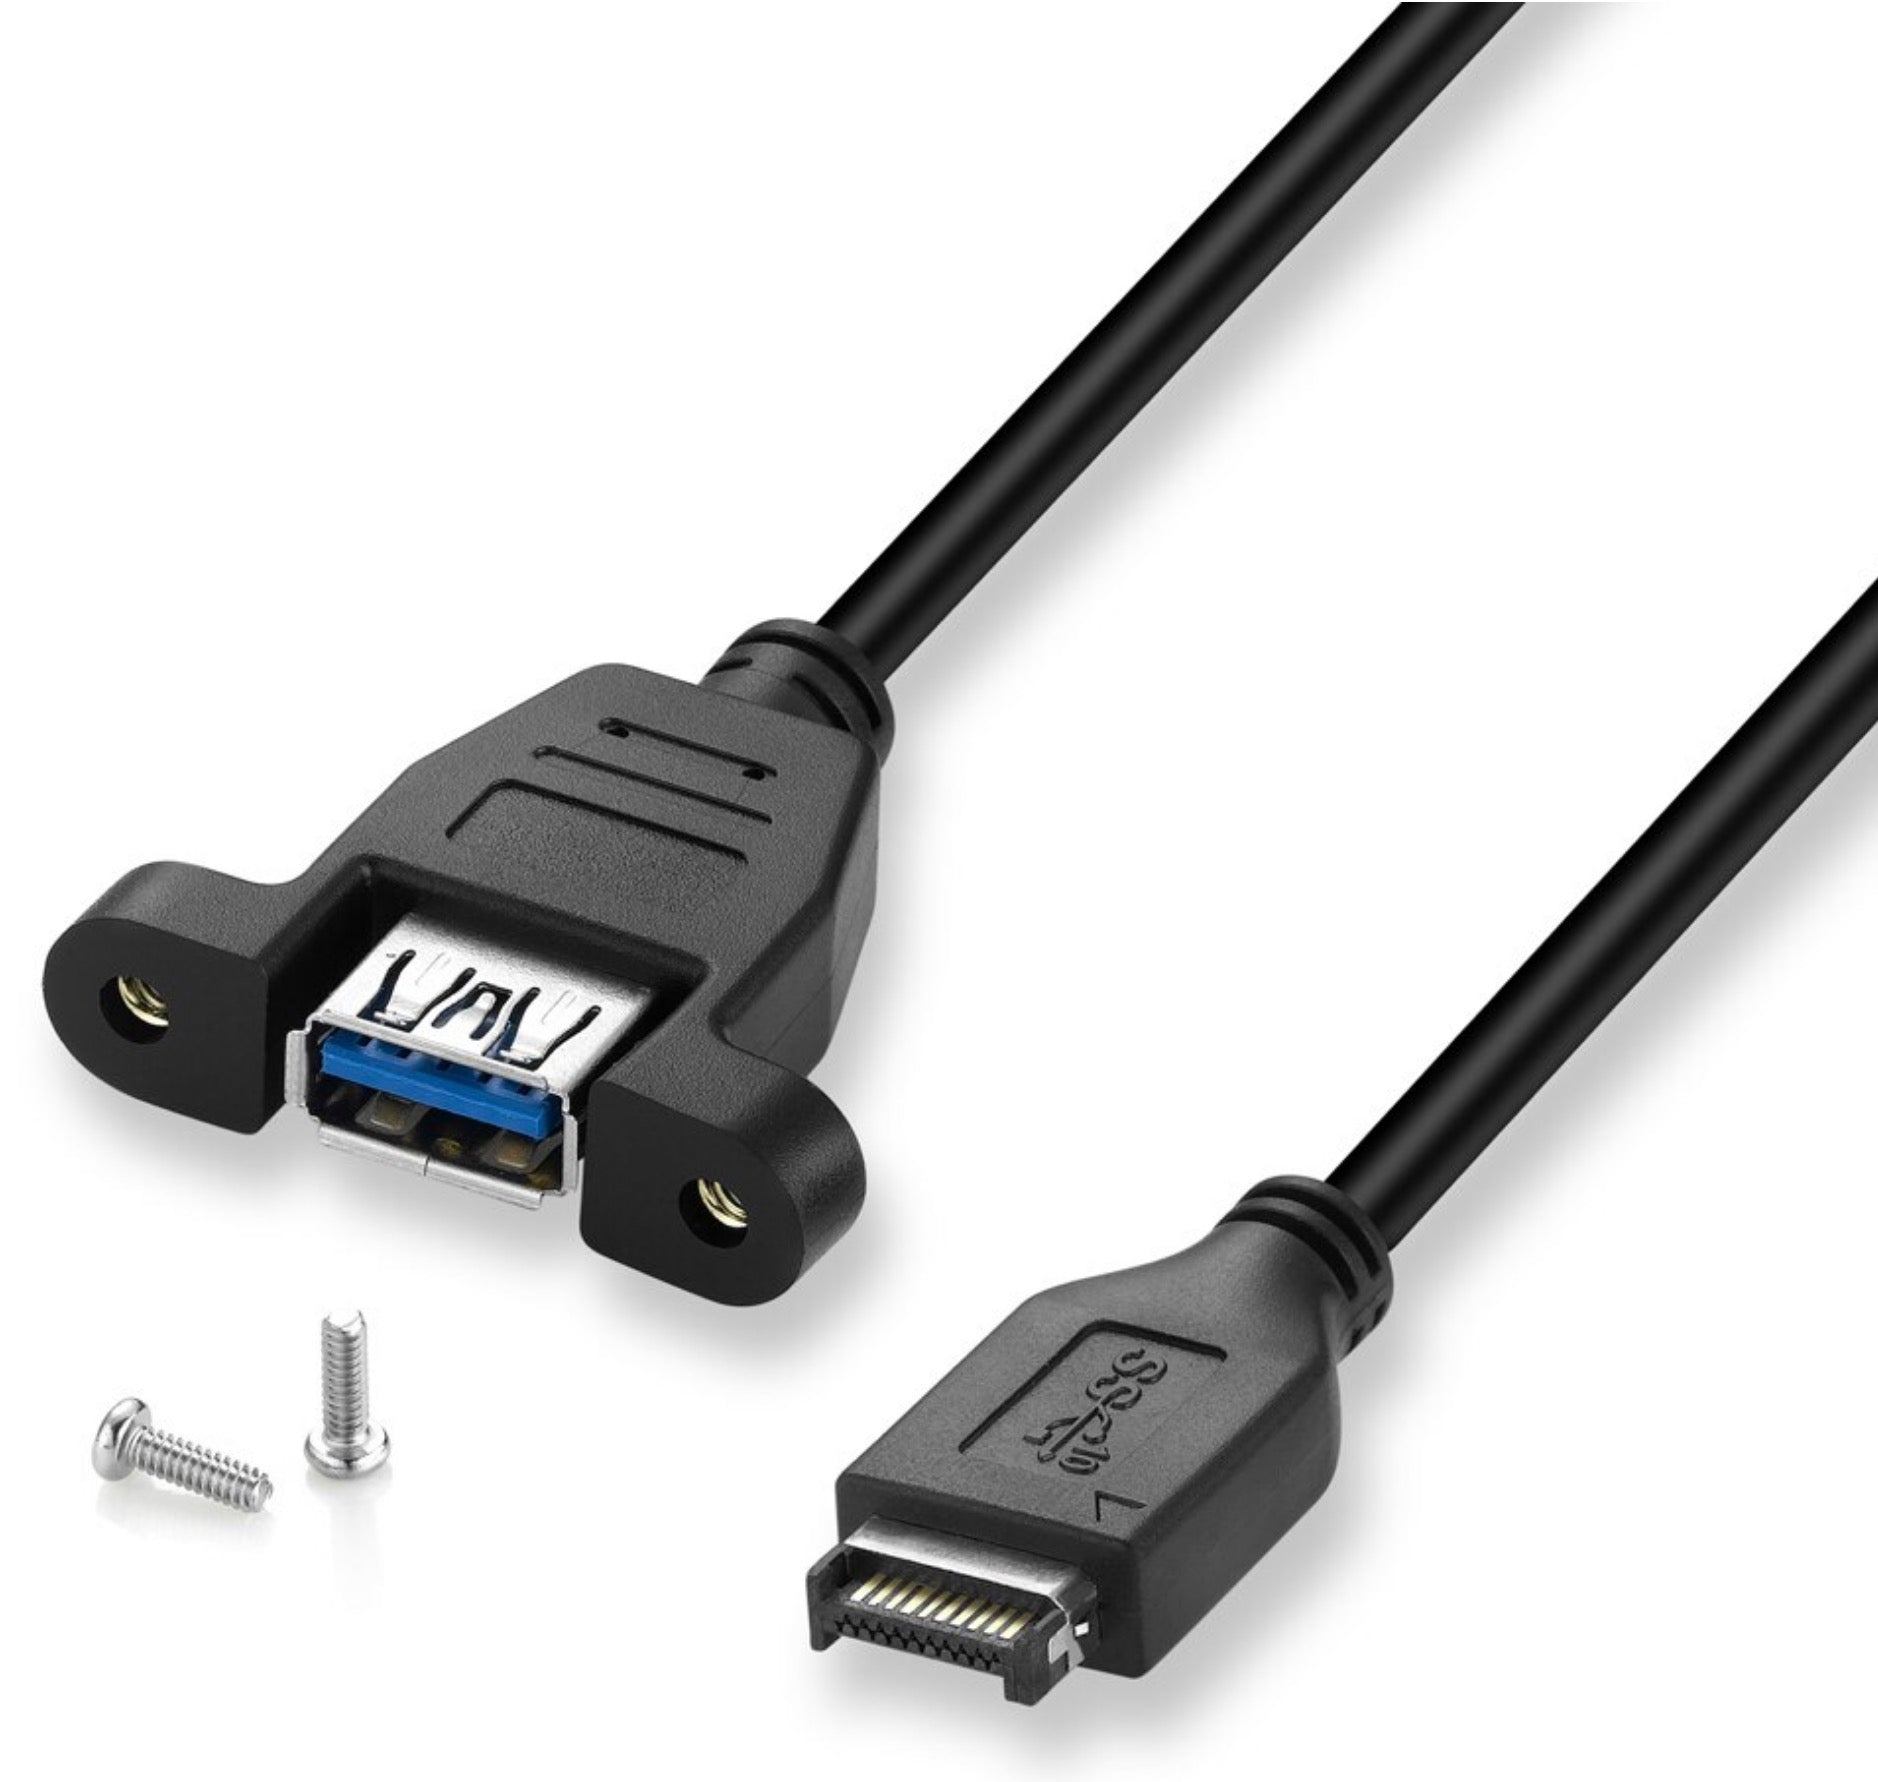 USB 3.1 Type E Gen2 to USB 3.0 Type A Panel Mount Cable 0.5m